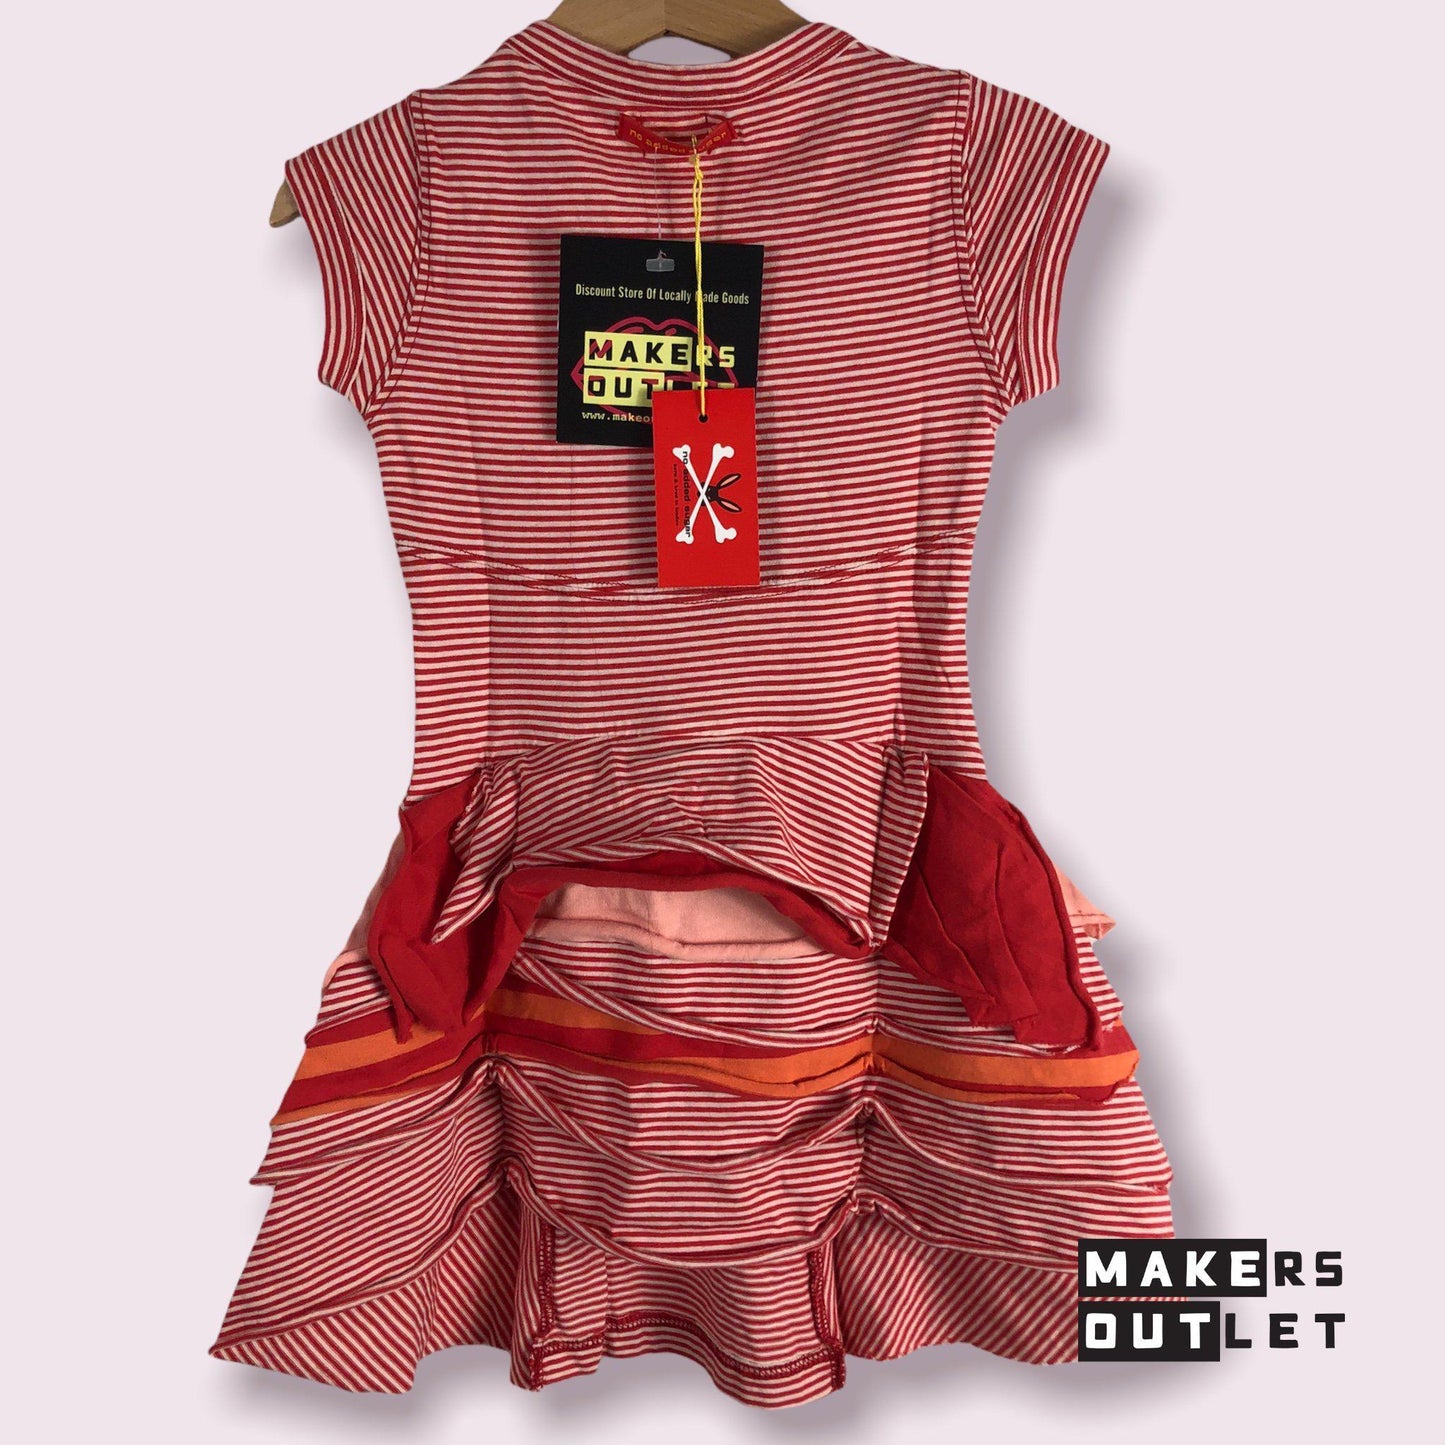 Toddler Red Striped Bustle Dress by No Added Sugar-Baby & Toddler Dresses-3T-